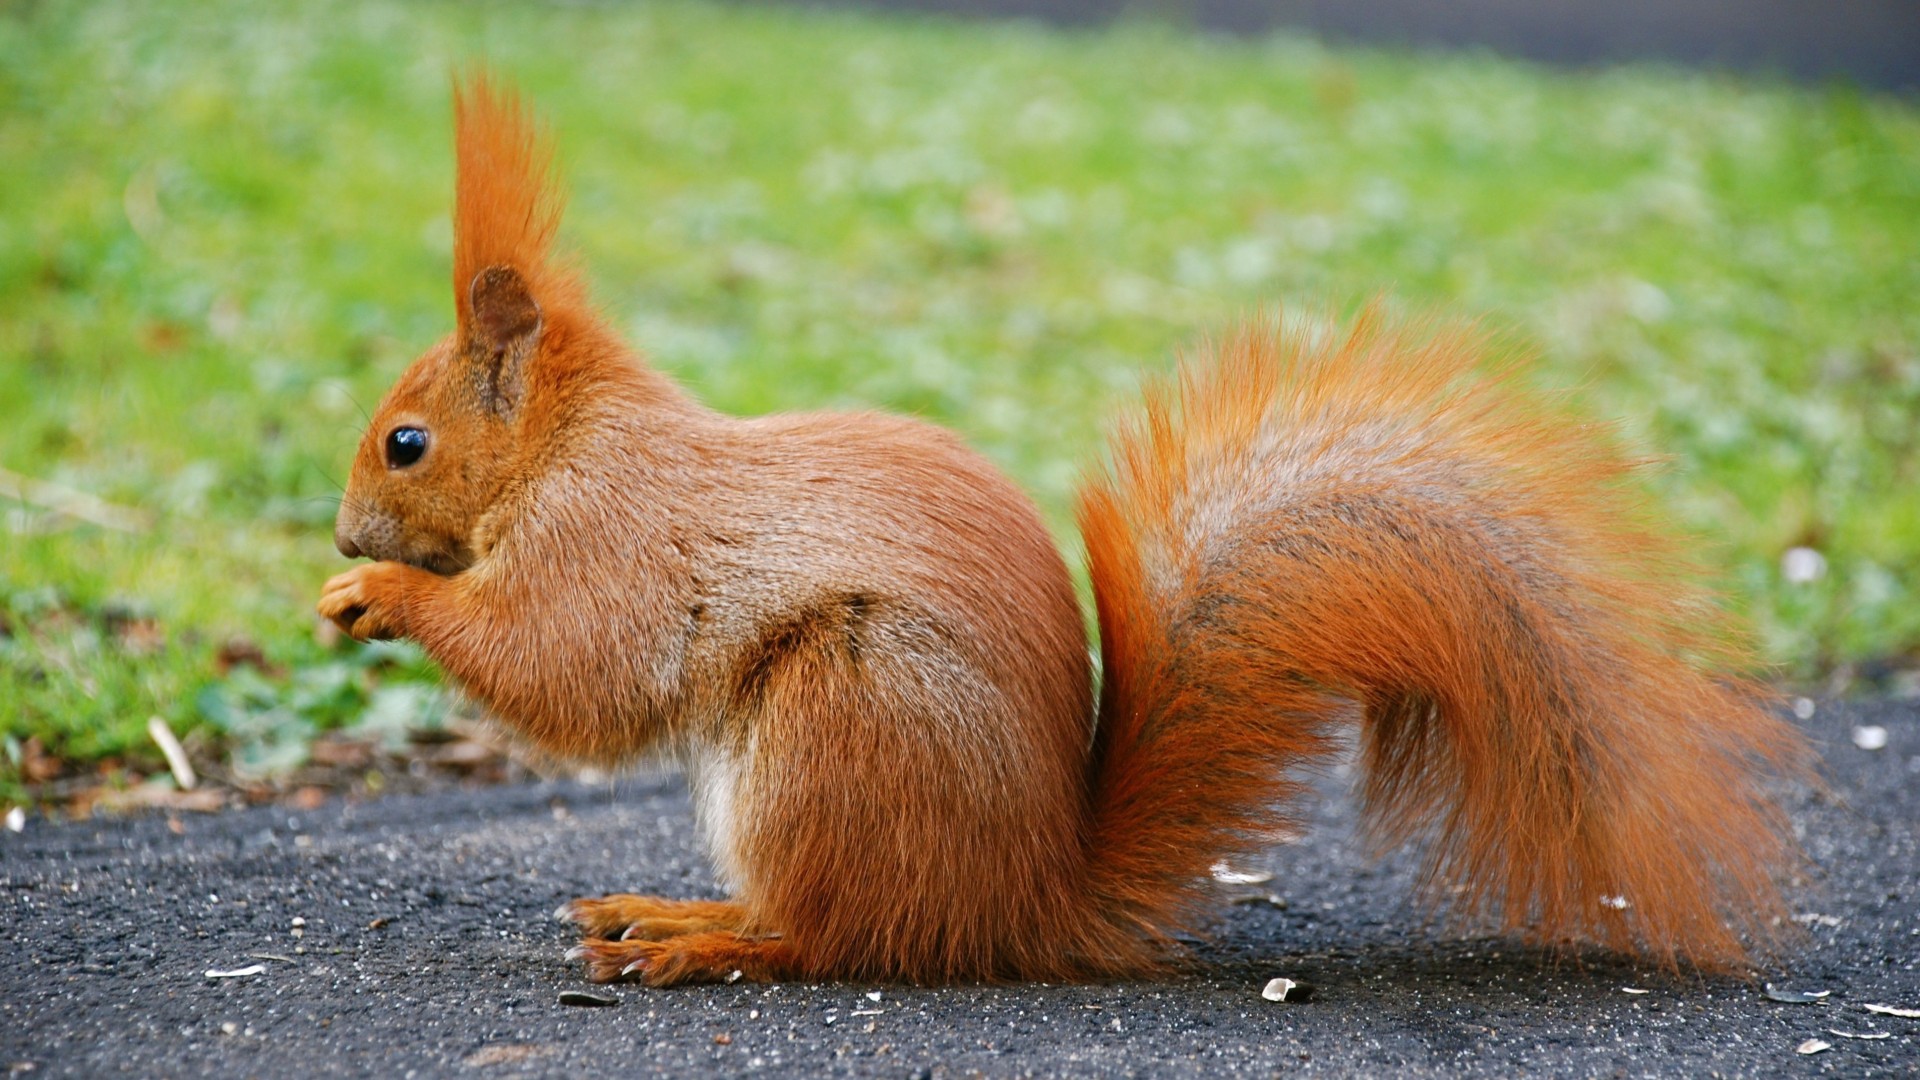 Orange squirrel wallpapers and images - wallpapers 